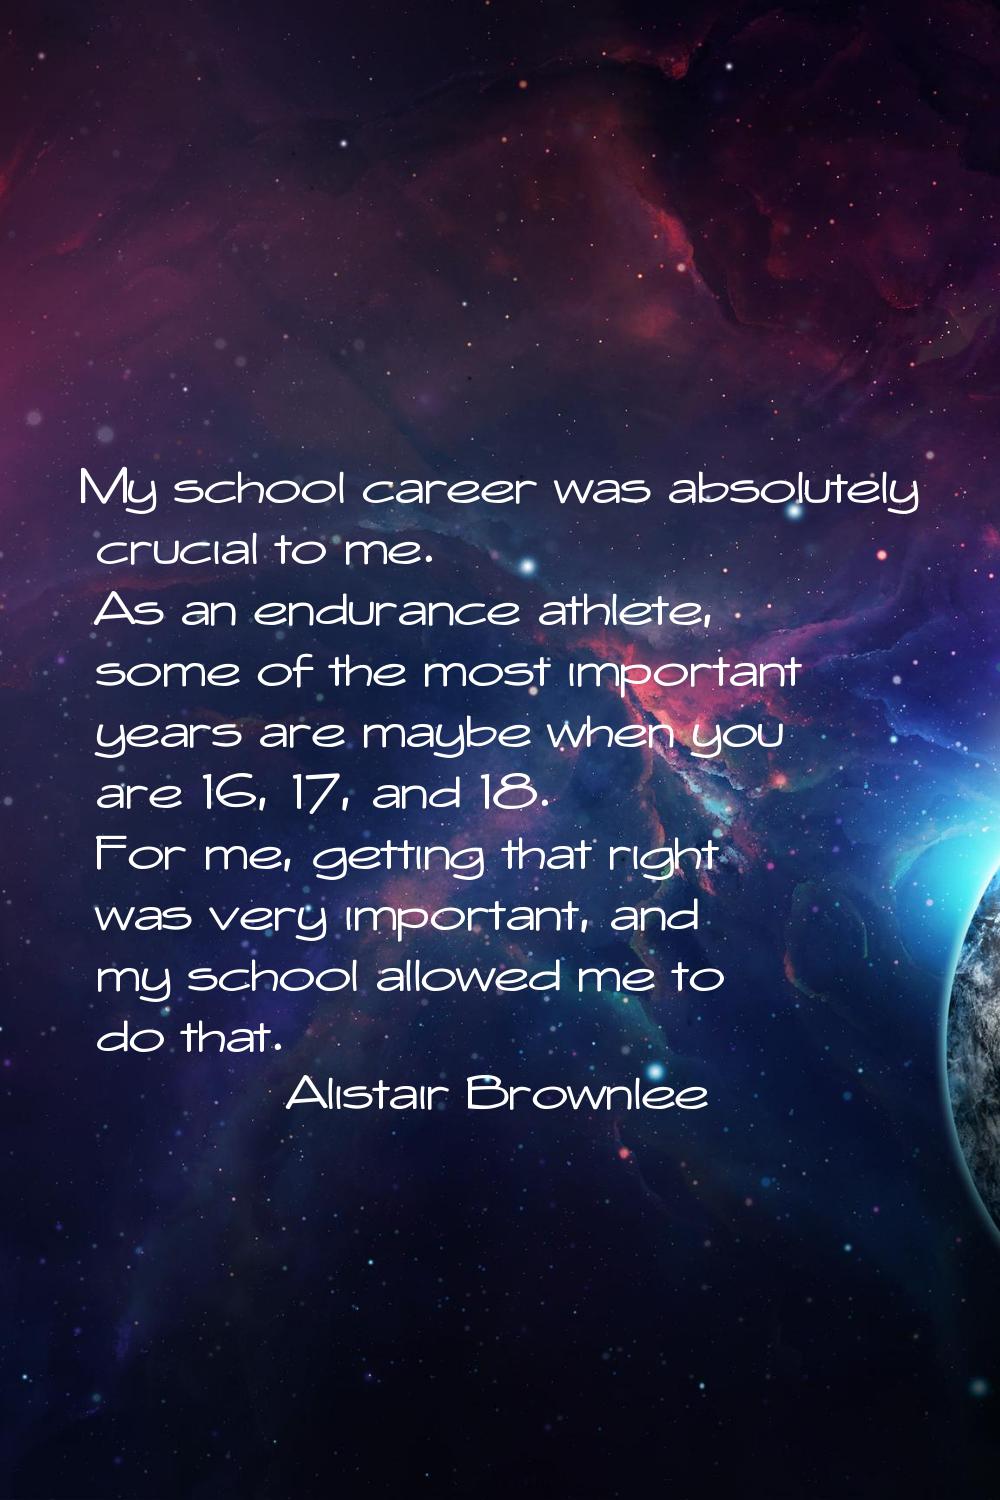 My school career was absolutely crucial to me. As an endurance athlete, some of the most important 